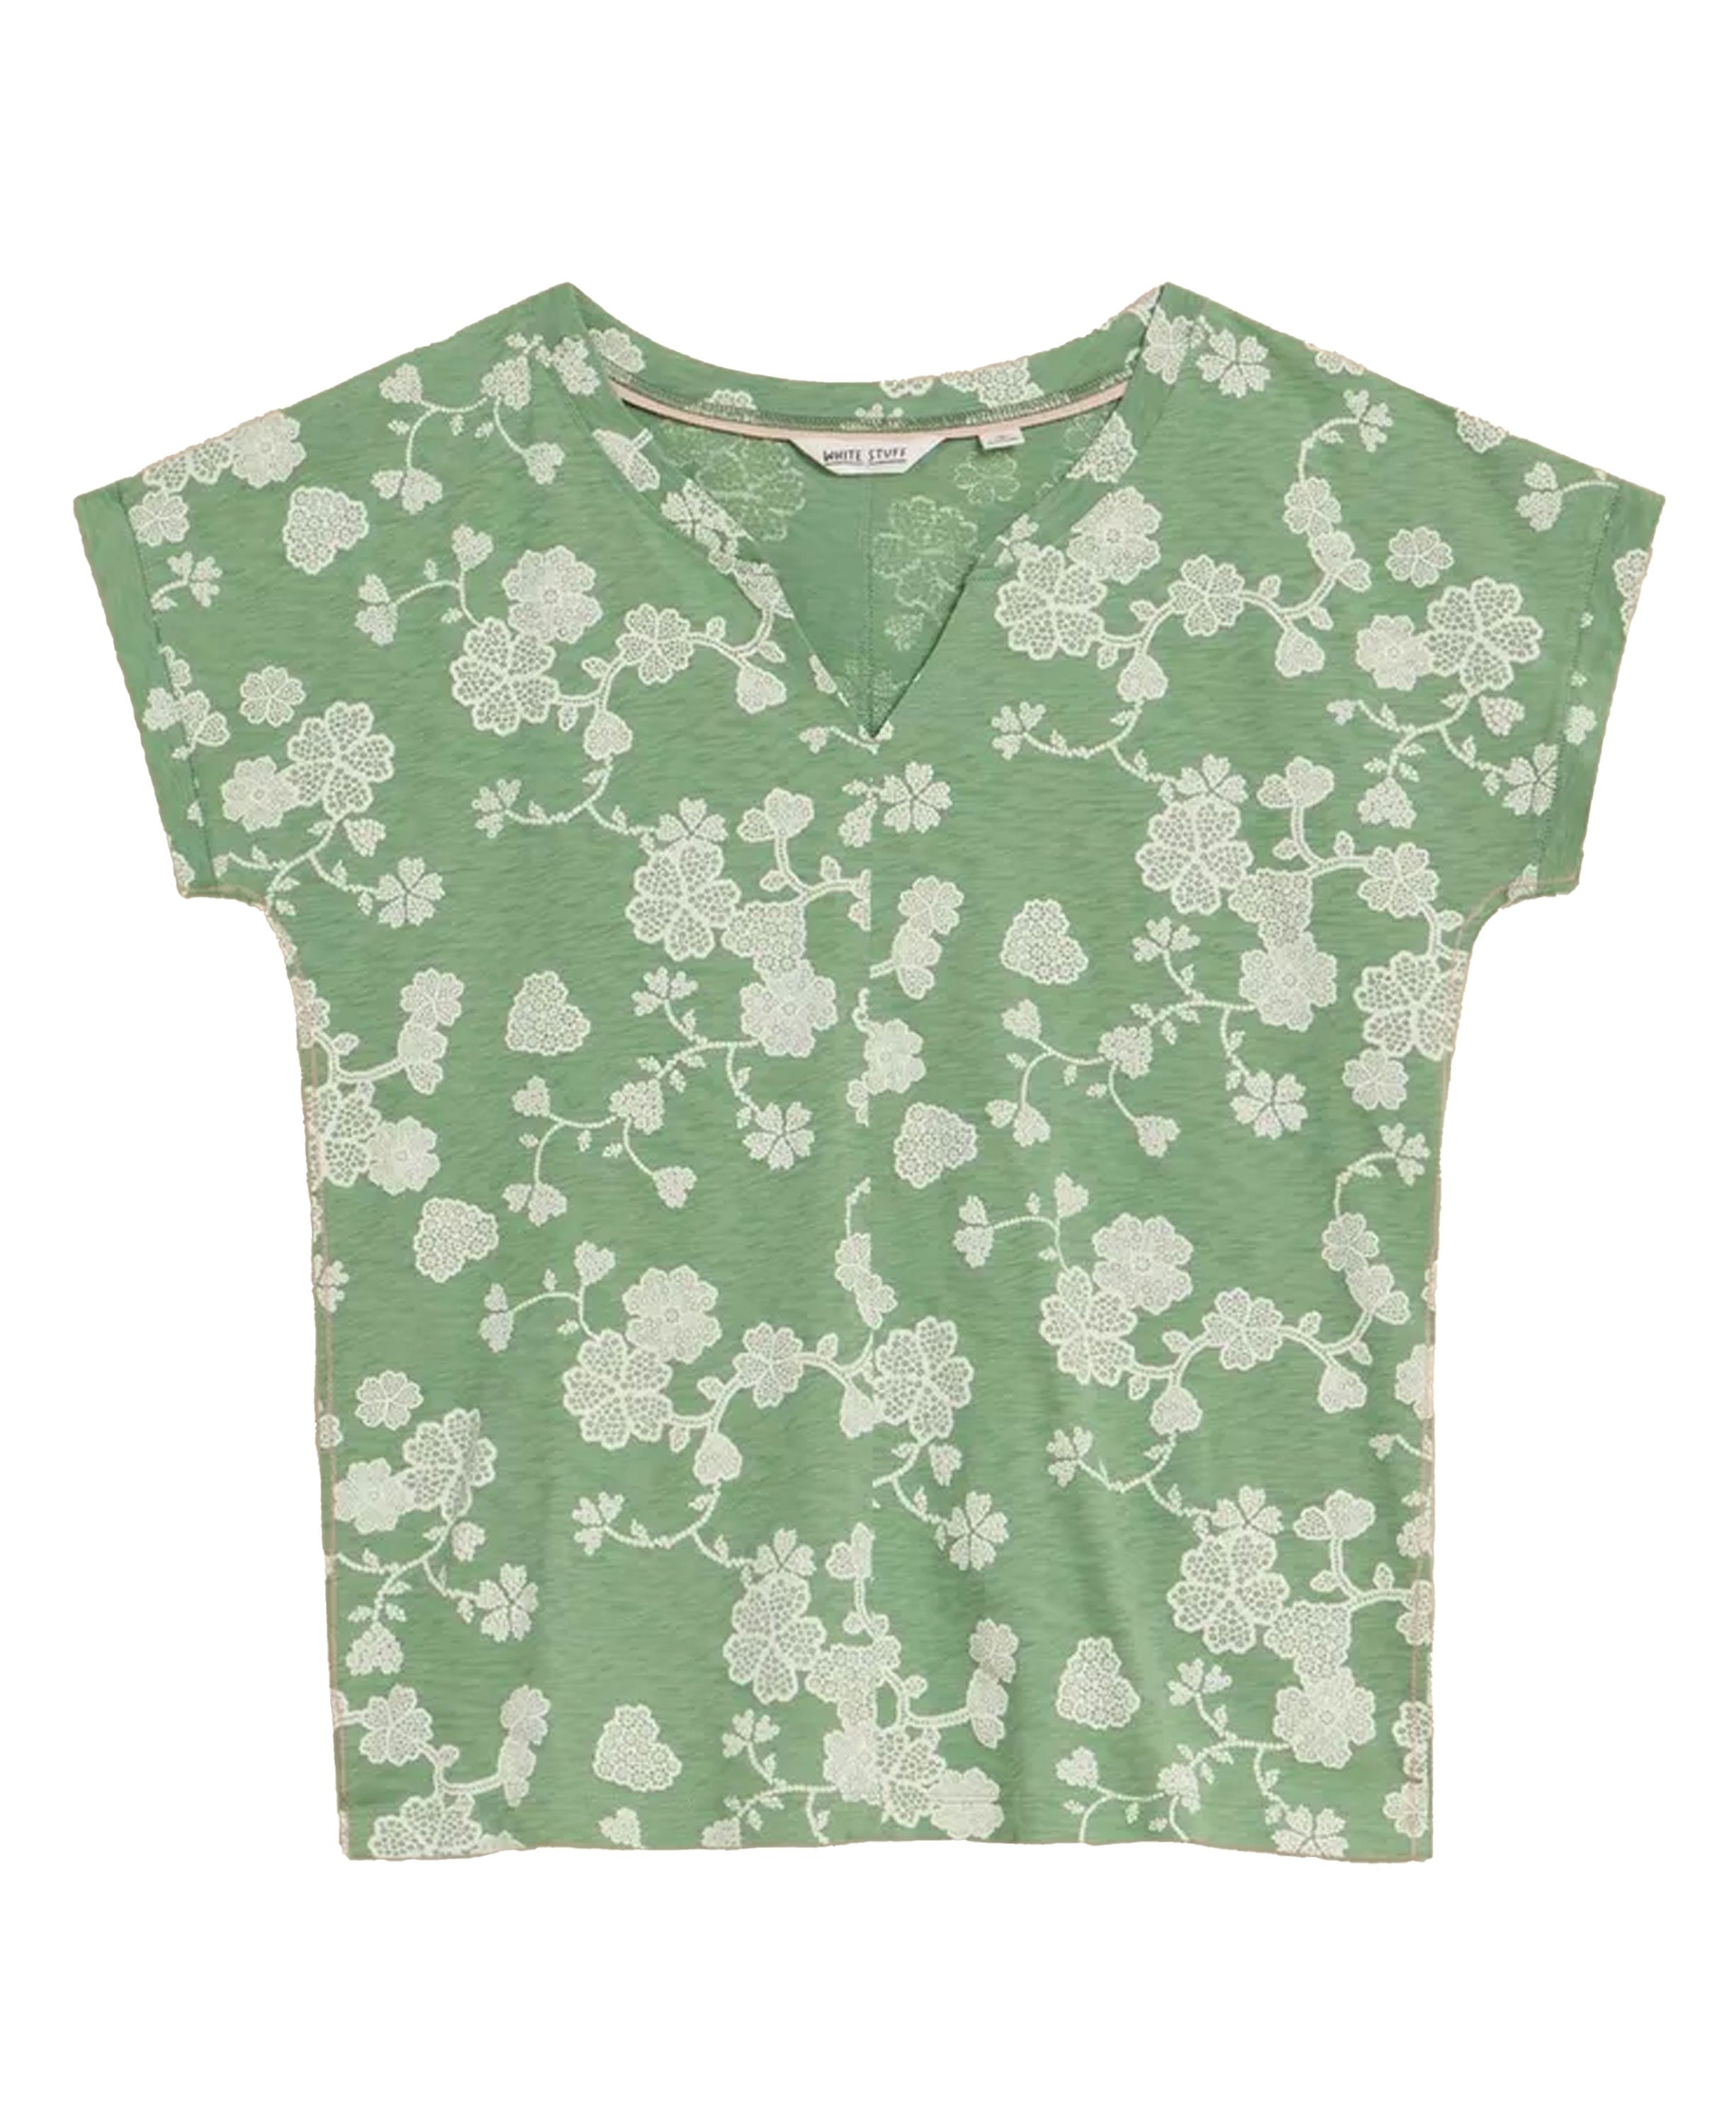 Nelly Notch Neck Cotton Tee - Green Print